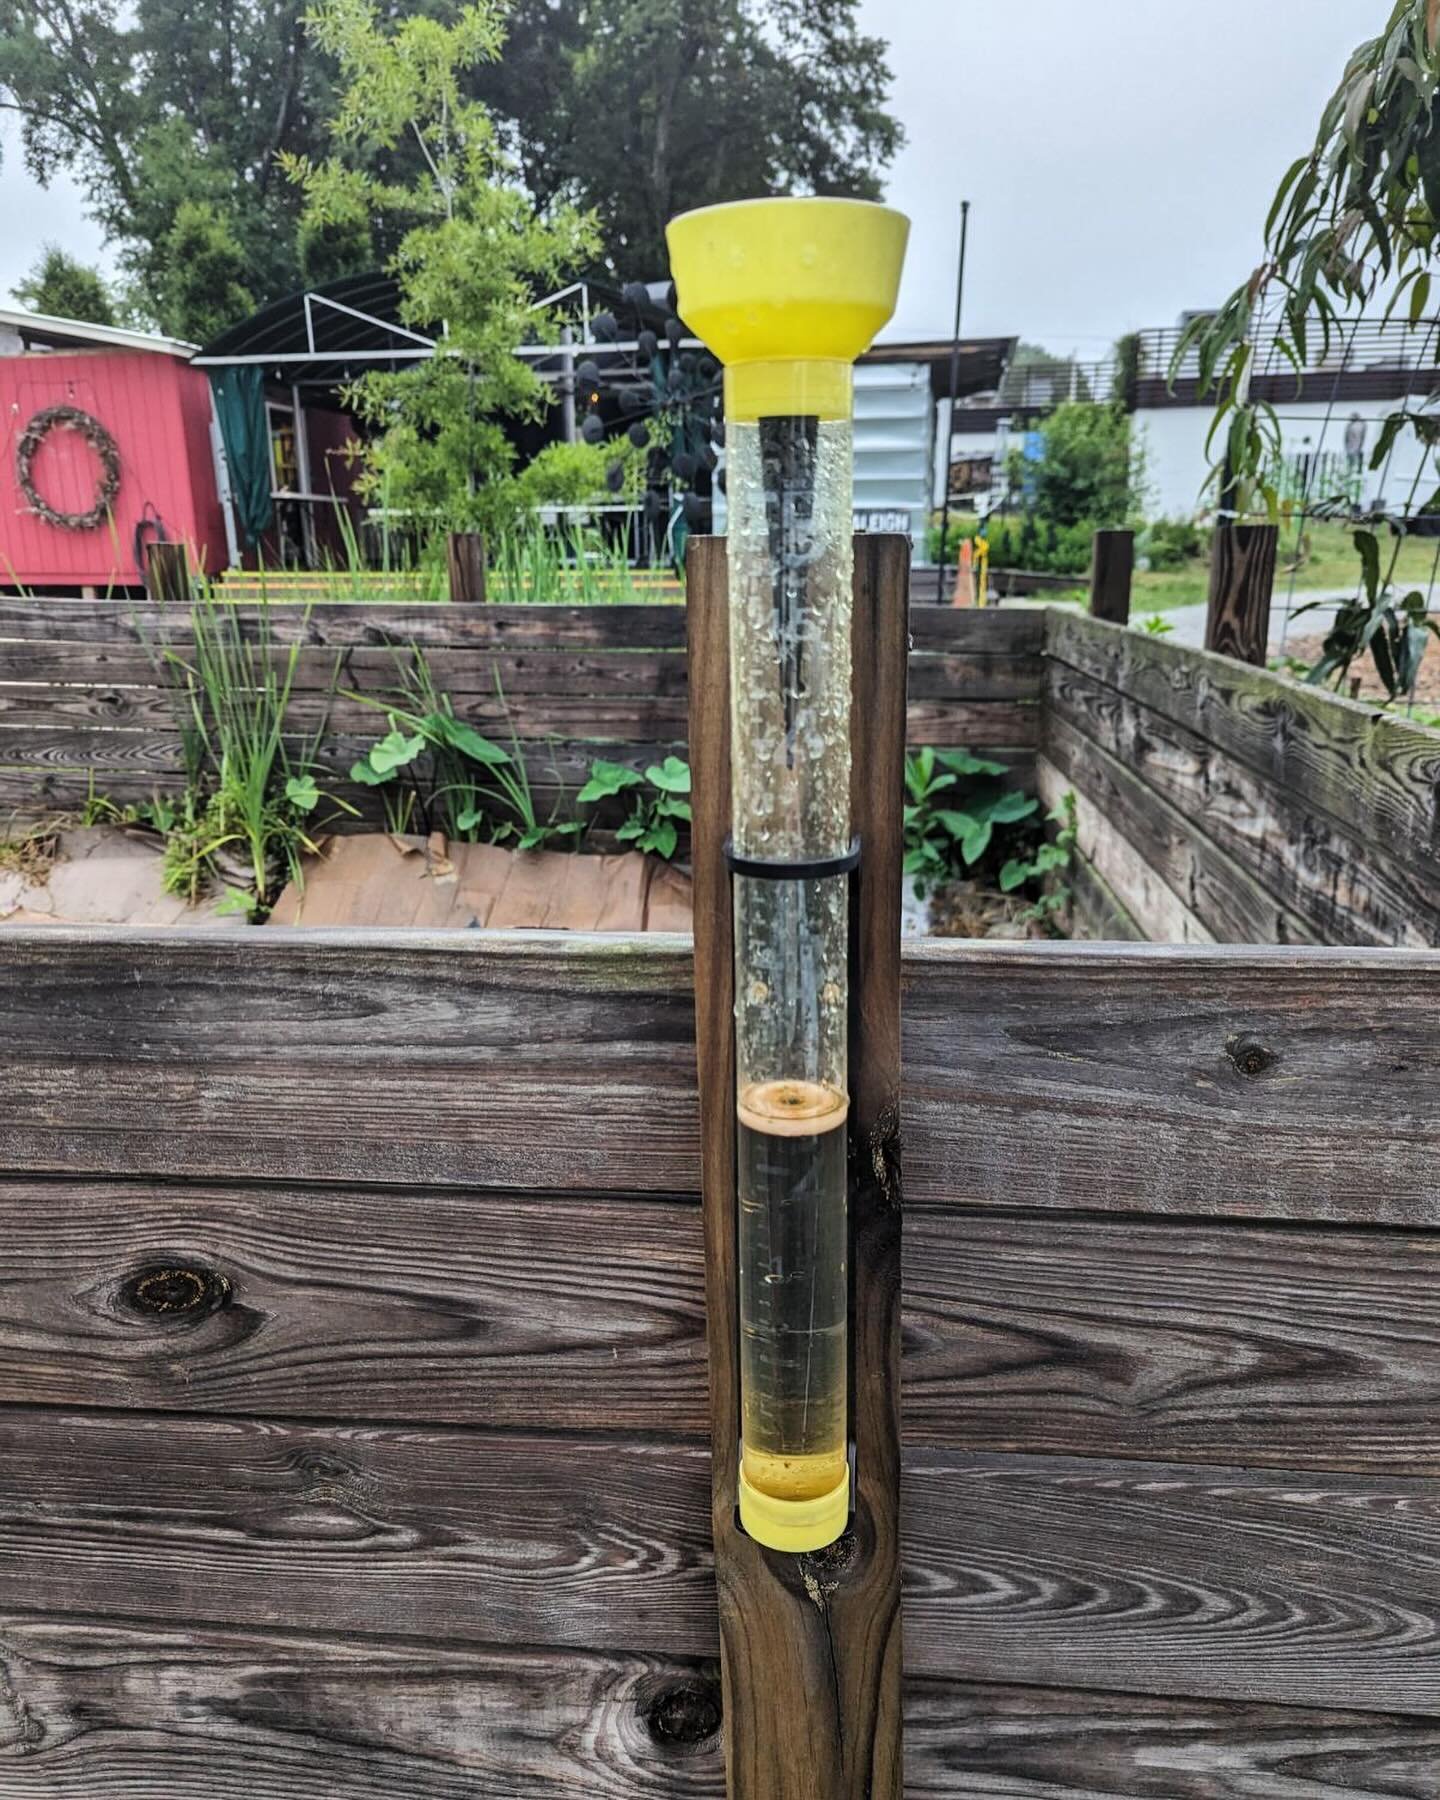 It&rsquo;s wet and getting wetter! With the threat of more stormy weather with thunder and lightening, we&rsquo;ve made the tough call to cancel this afternoon&rsquo;s Farmstand and Wine+Weeds. Working in a very wet garden can spread disease. See you